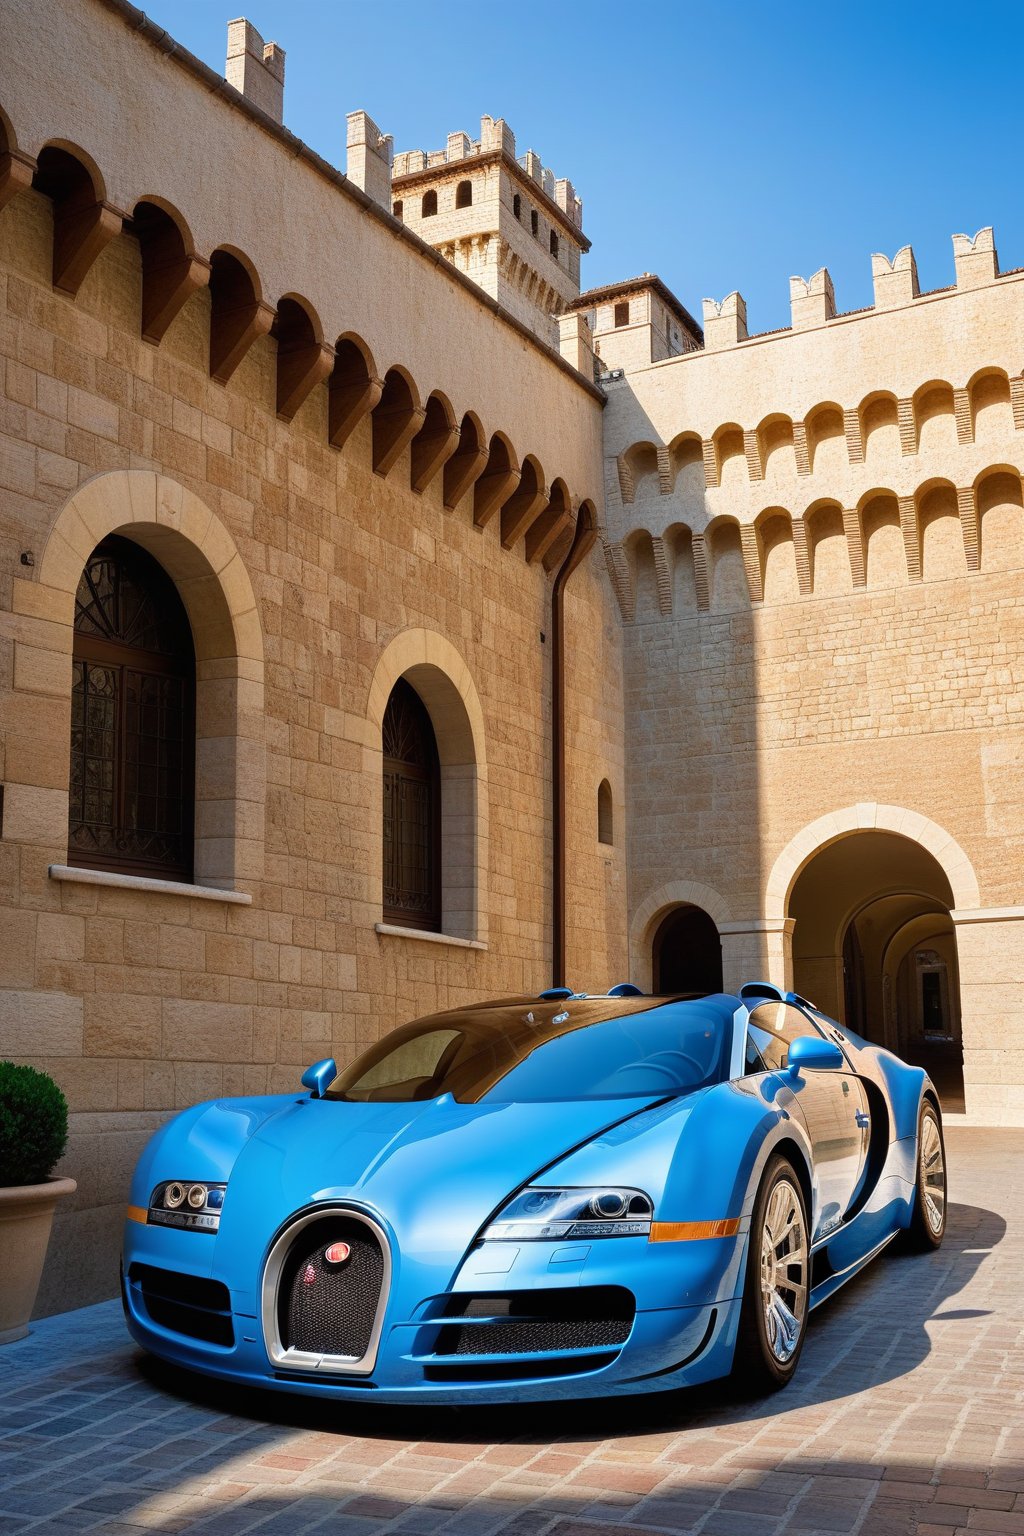 ((Hyper-Realistic)) photo of 1 car \(1999 Bugatti Veyron EB 16.4 designed by Walter de Silva\) parked,Front side view,well-lit,Super-detailed shiny body and wheels with reflection,(backdrop: Hyper-realistic Super-detailed (Documentary photograph:1.3) of a magnificent (Italian castle:1.4),(stone wall:1.2),14th century,(golden ratio:1.3))
BREAK 
aesthetic,rule of thirds,depth of perspective,perfect composition,studio photo,trending on artstation,cinematic lighting,(Hyper-realistic photography,masterpiece, photorealistic,ultra-detailed,intricate details,16K,sharp focus,high contrast,kodachrome 800,HDR:1.3),H effect,photo_b00ster,itacstl